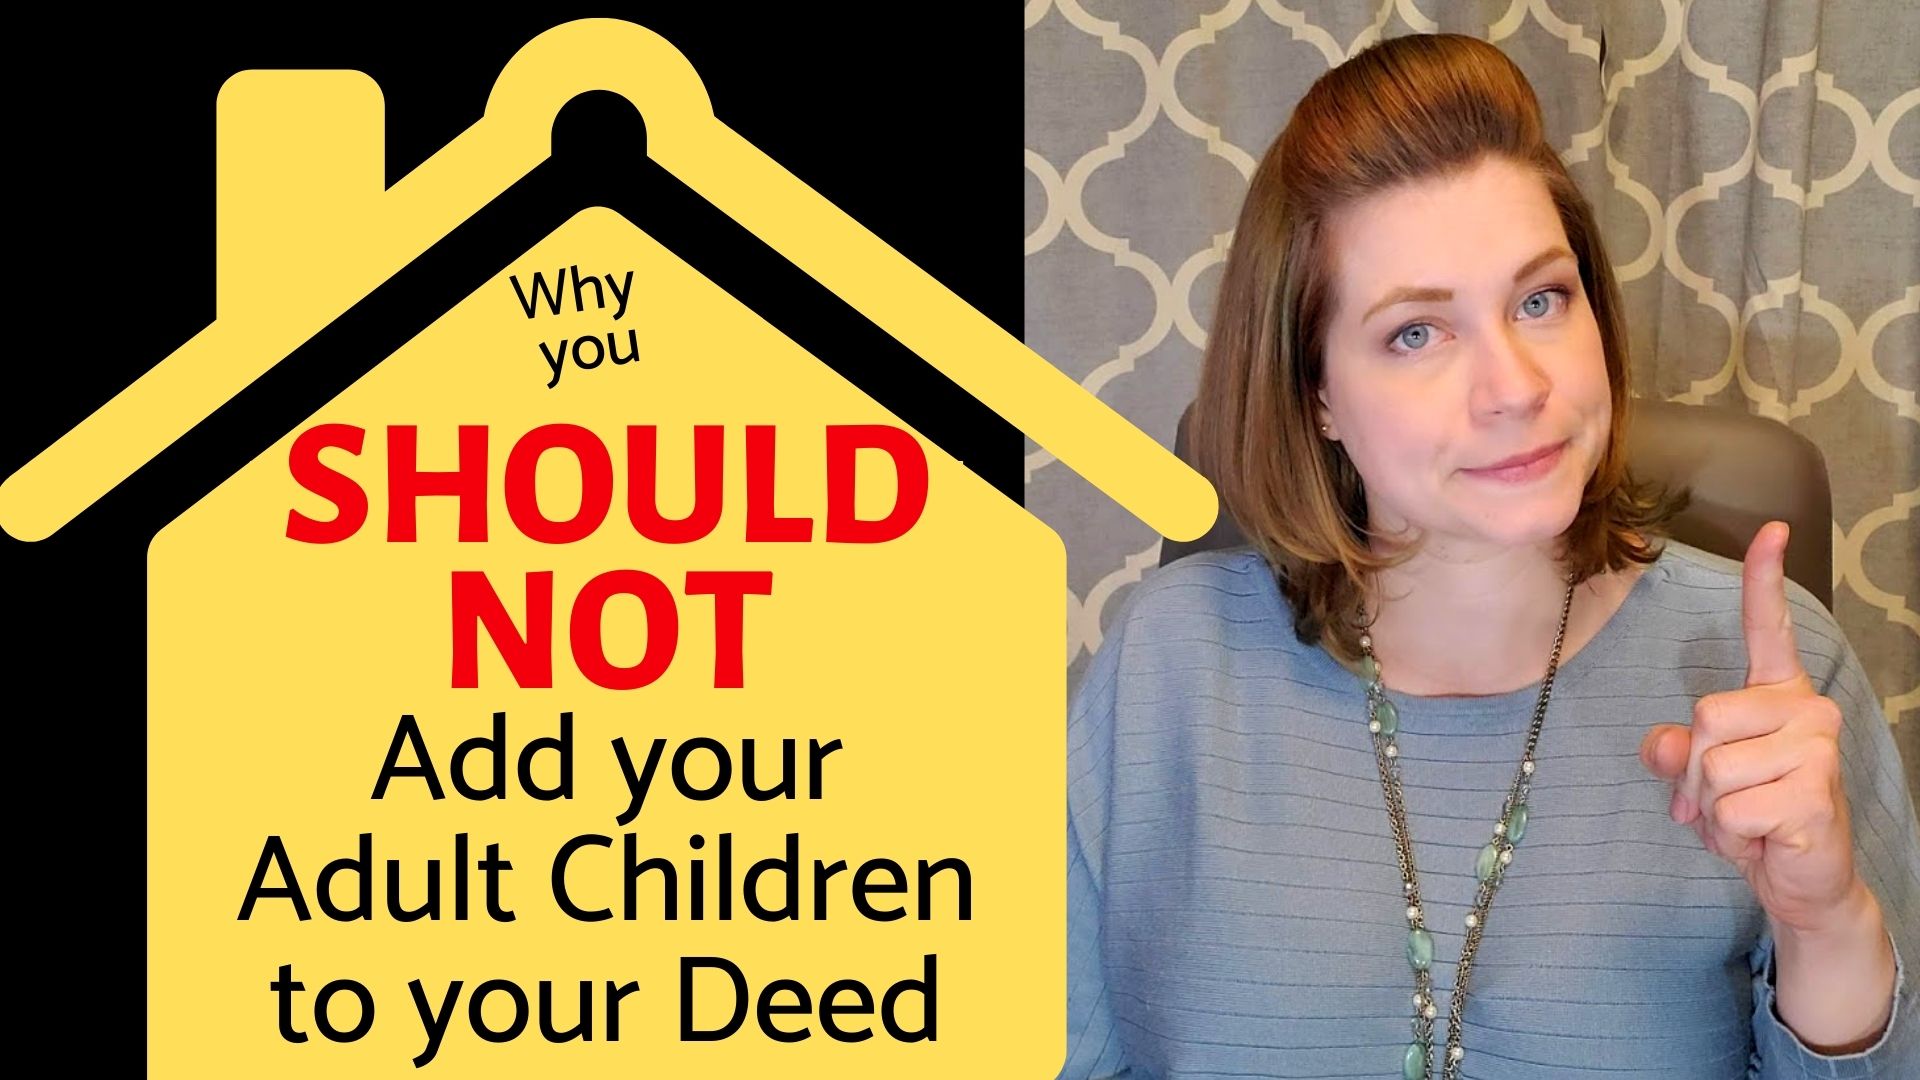 Thumbnail - Why you should not add your children to your deed